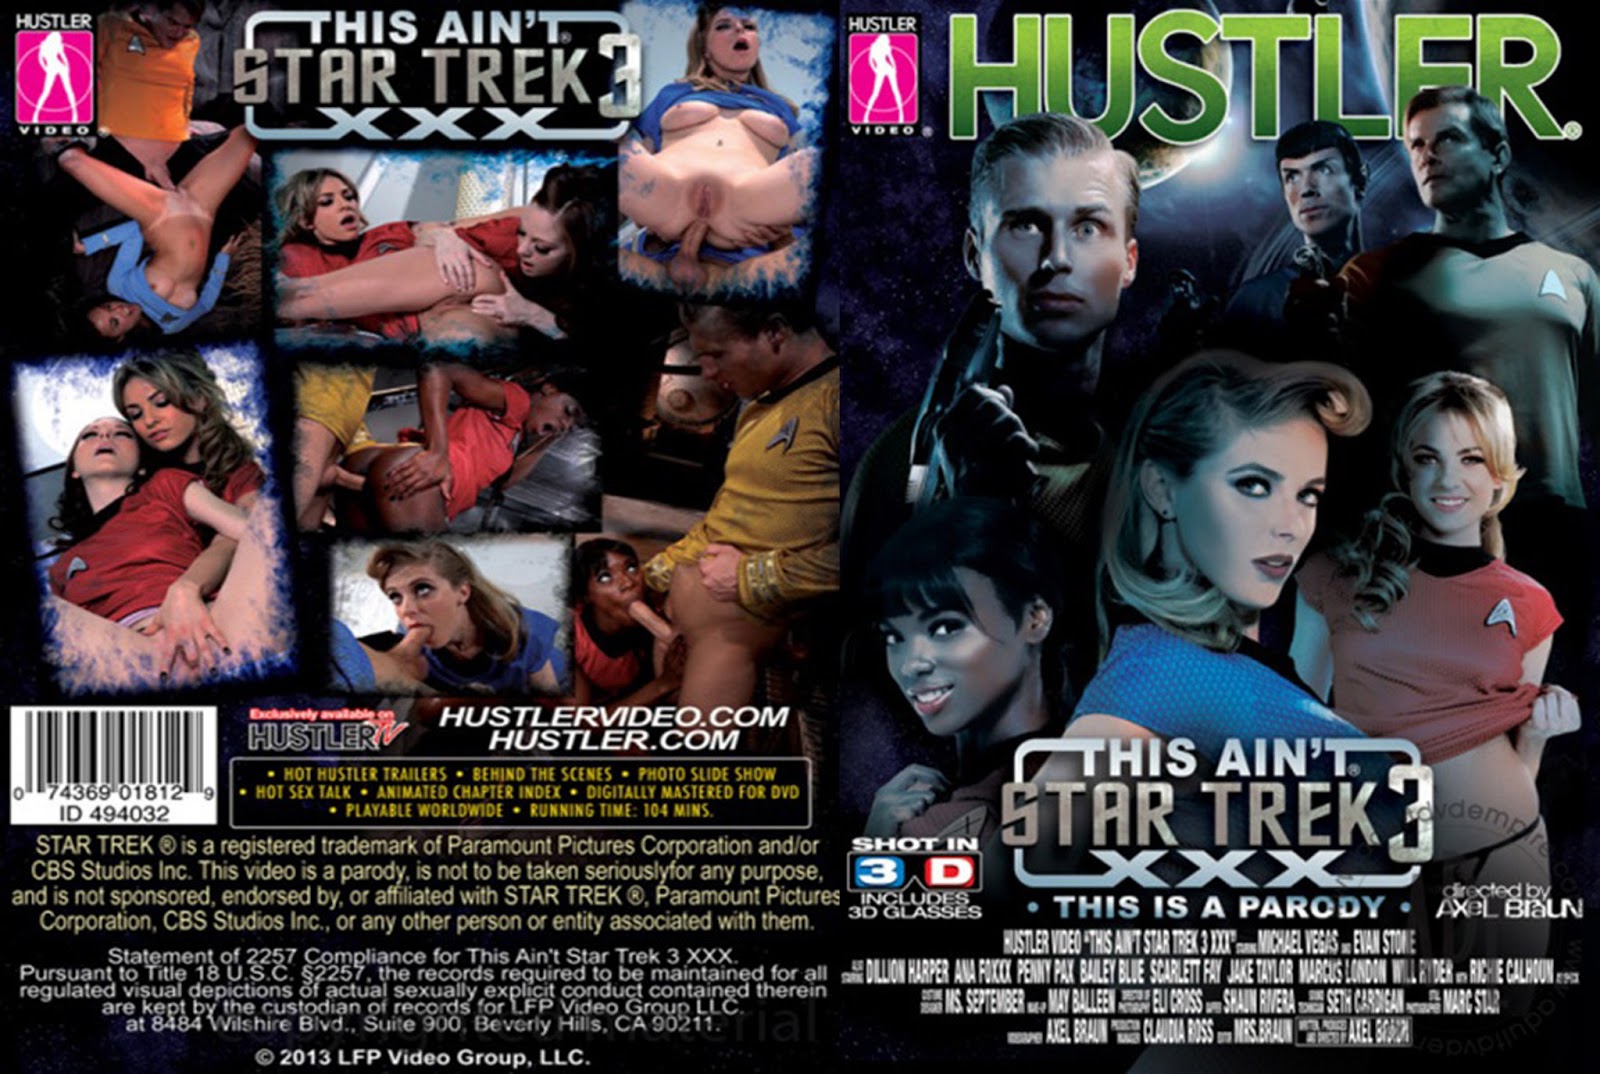 This ain t star trek xxx - This Ain't Star Trek XXX 2: The Butter...